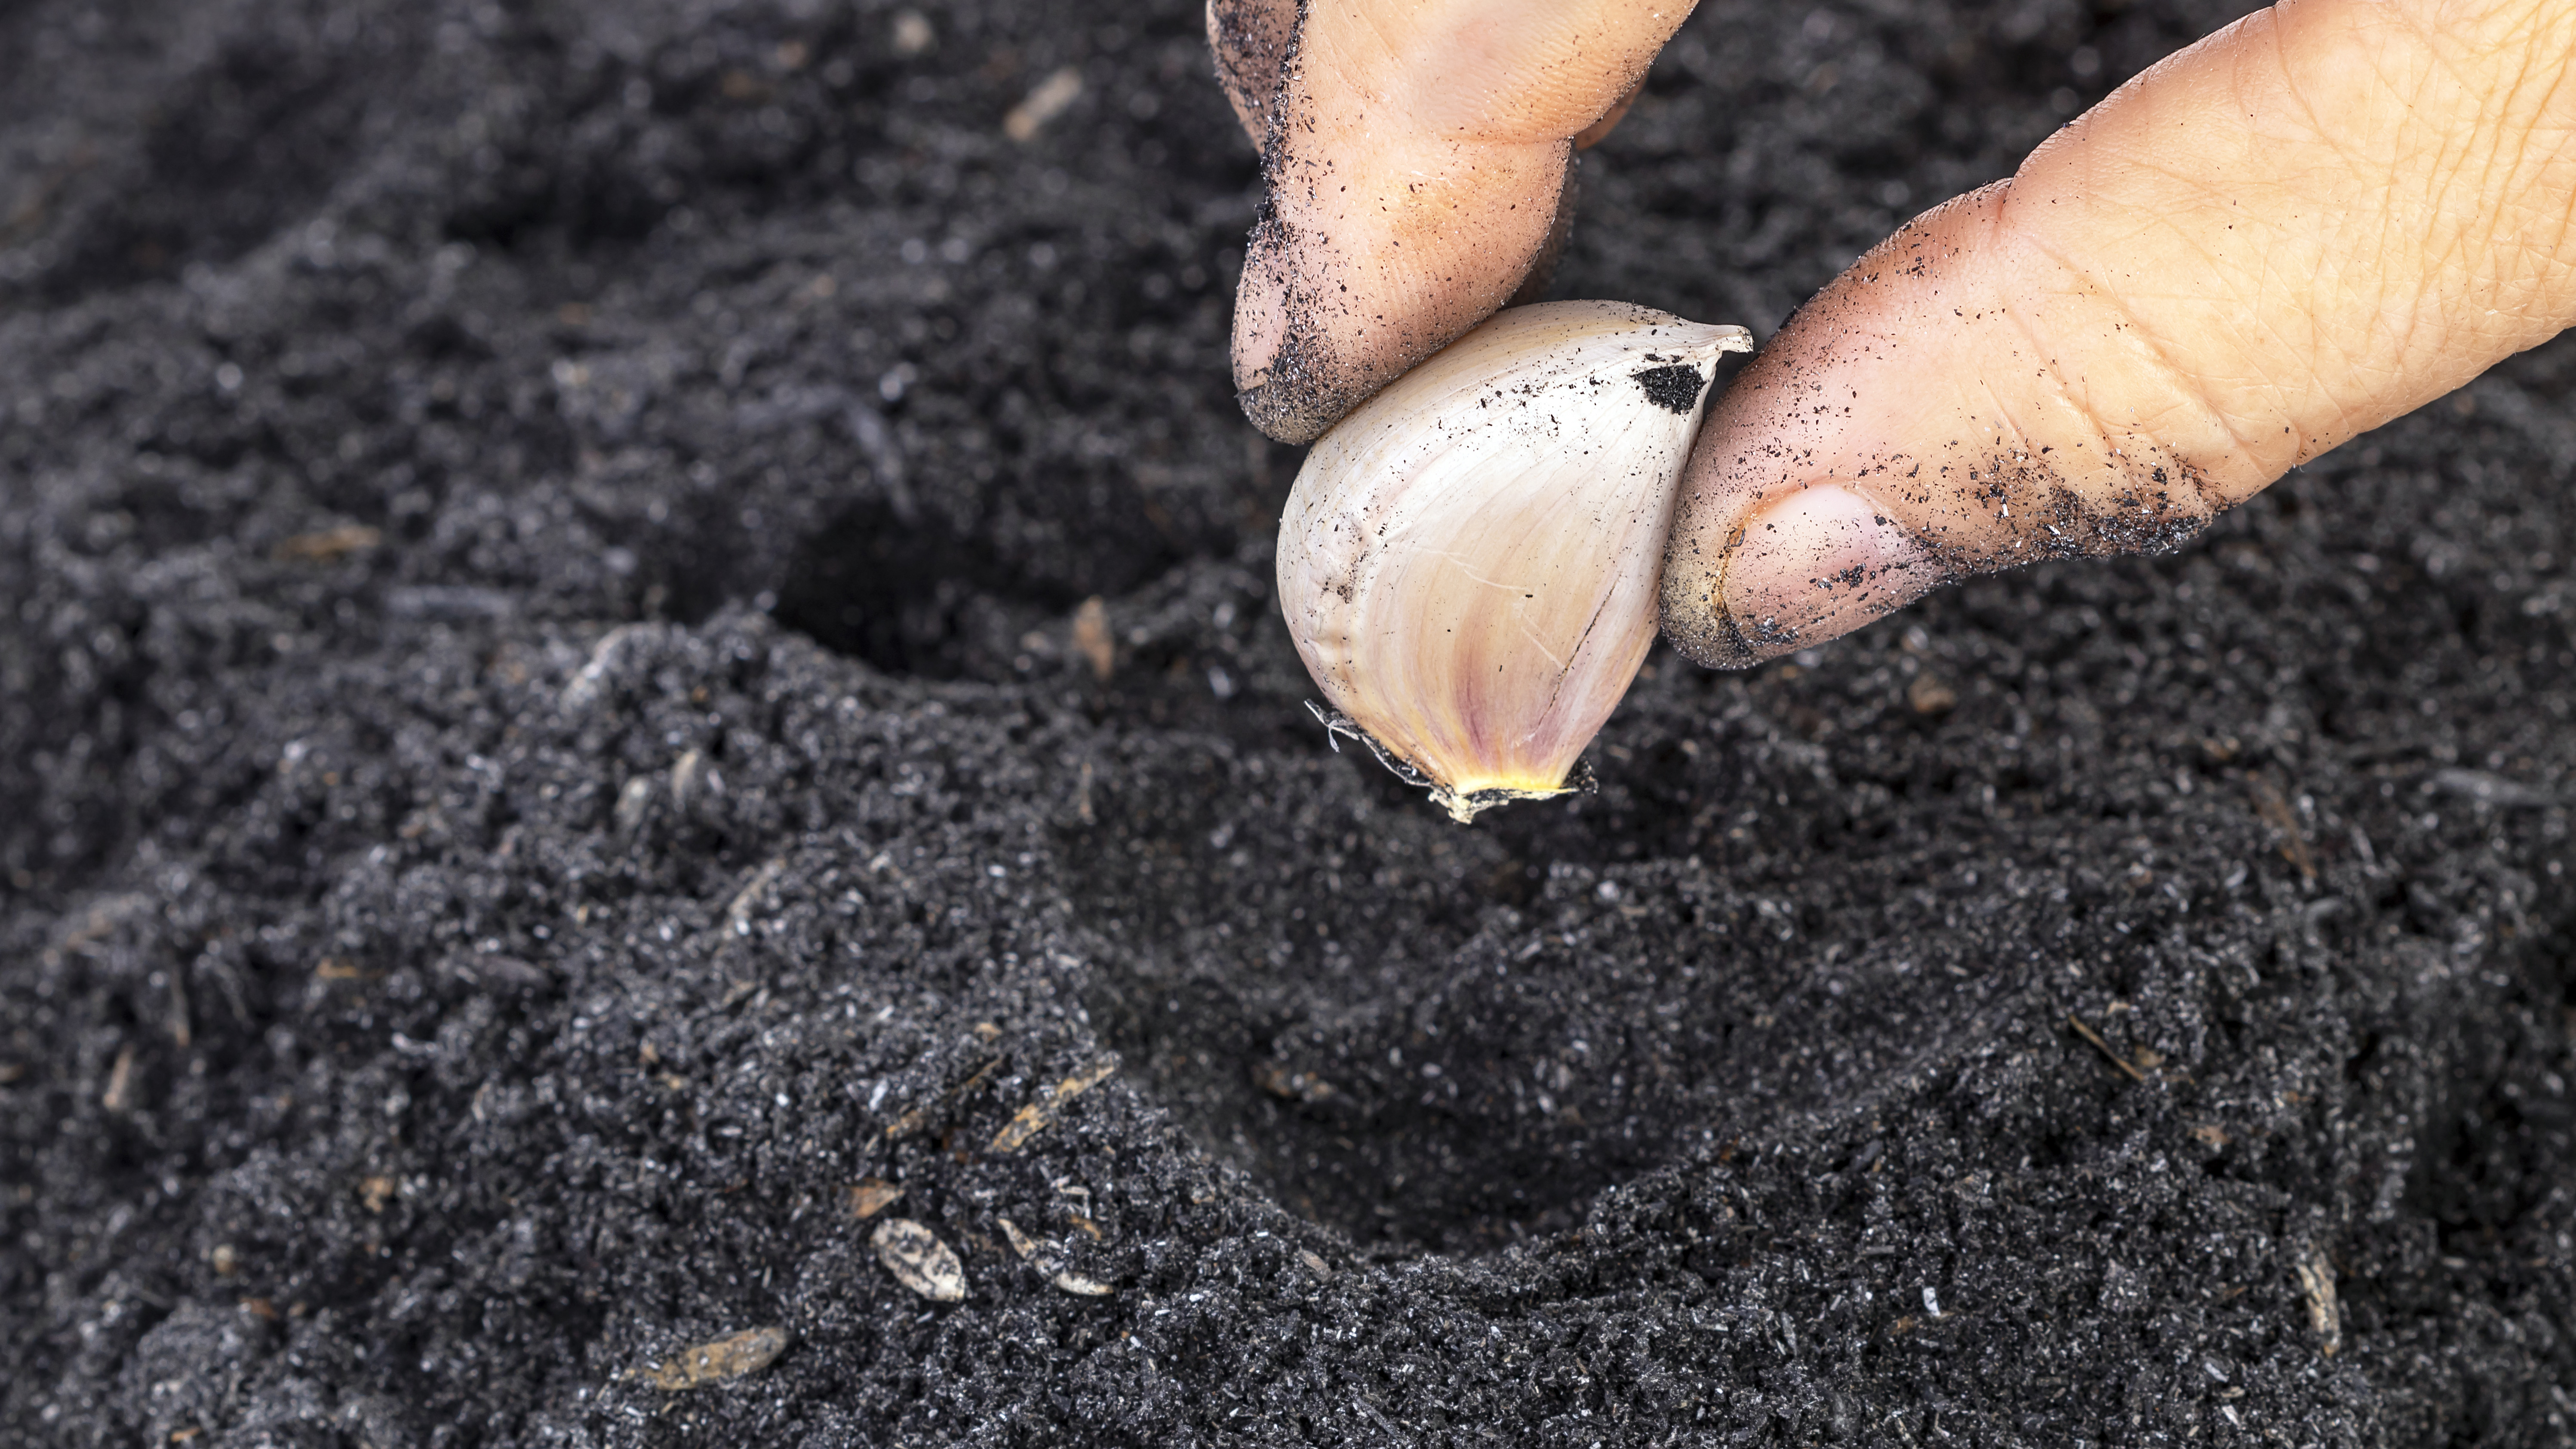 Someone planting a clove up garlic by hand up close